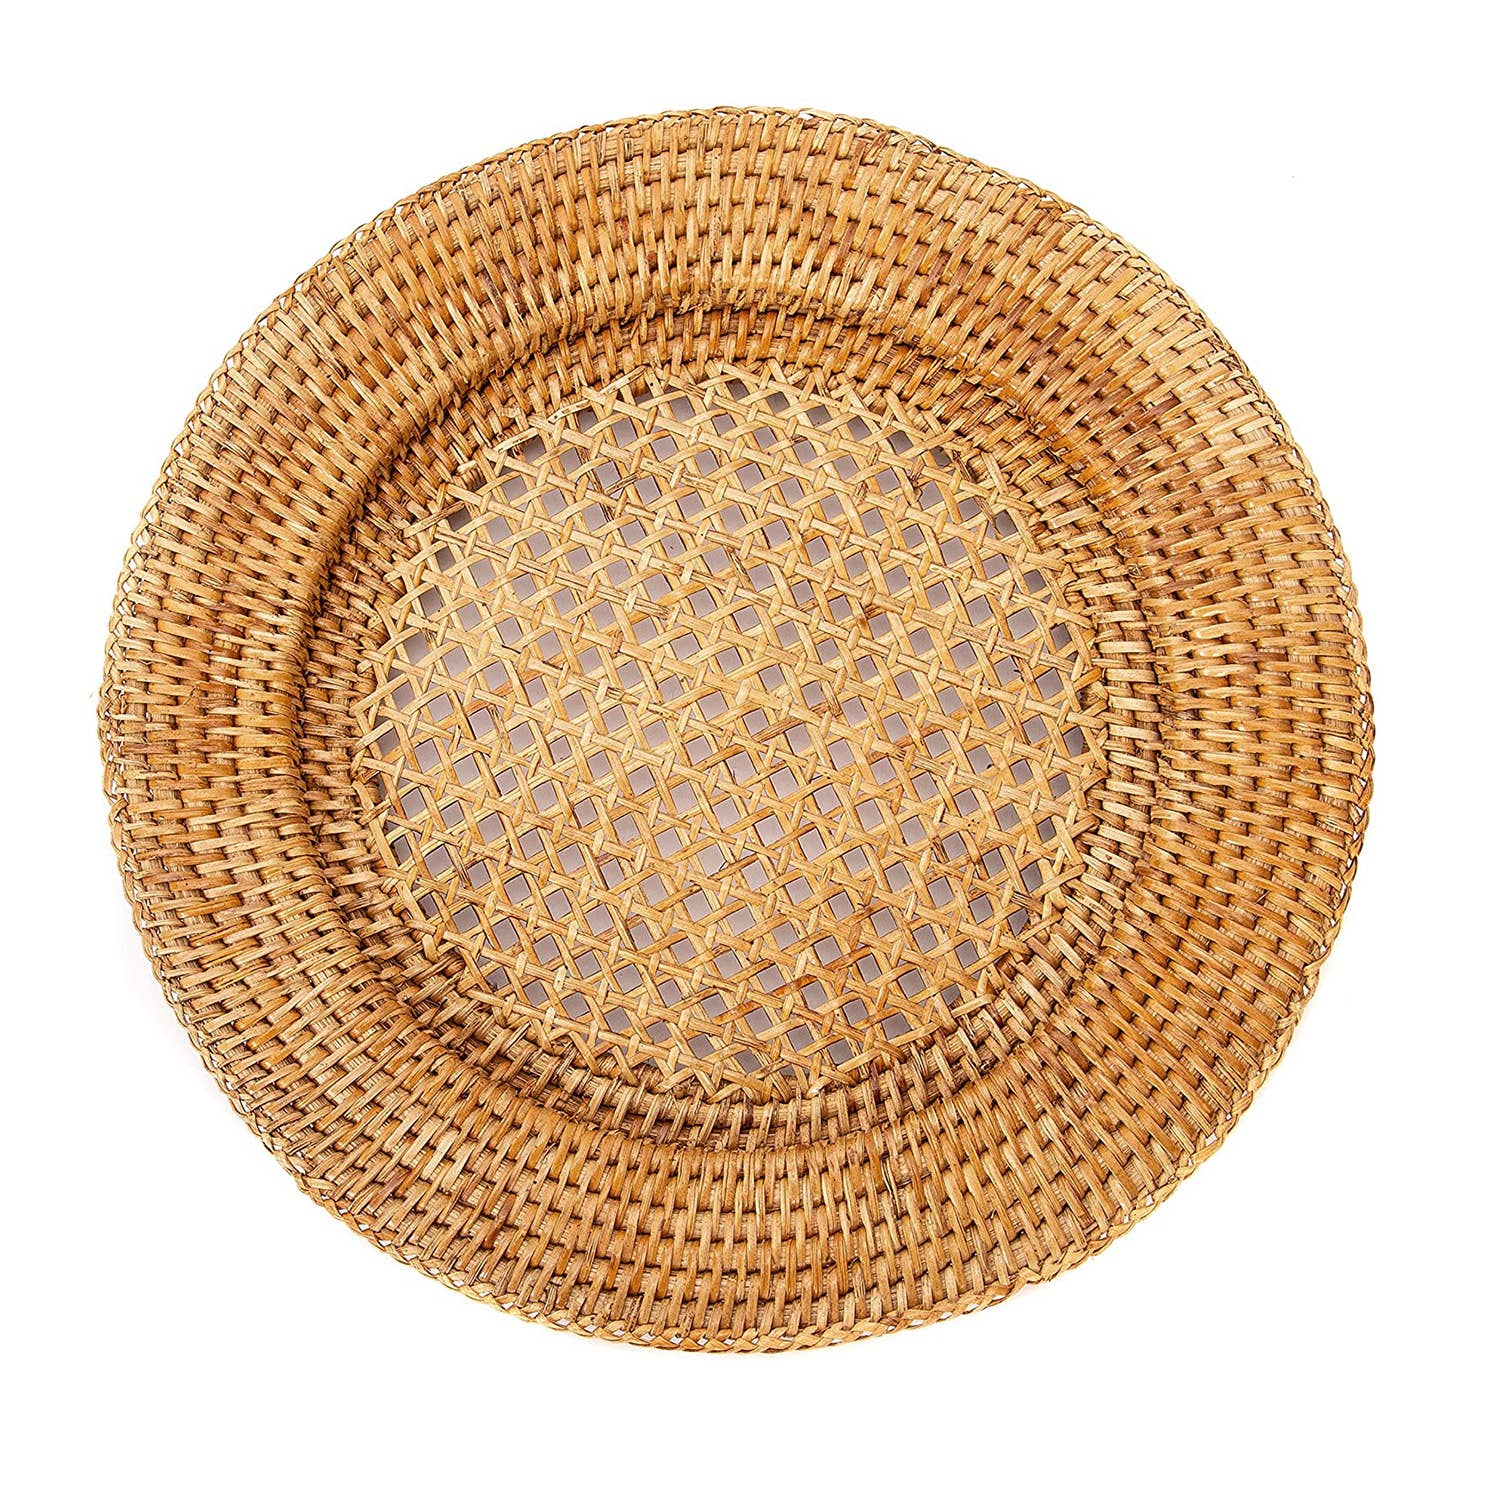 Commons Woven Straw Rattan Charger Plate